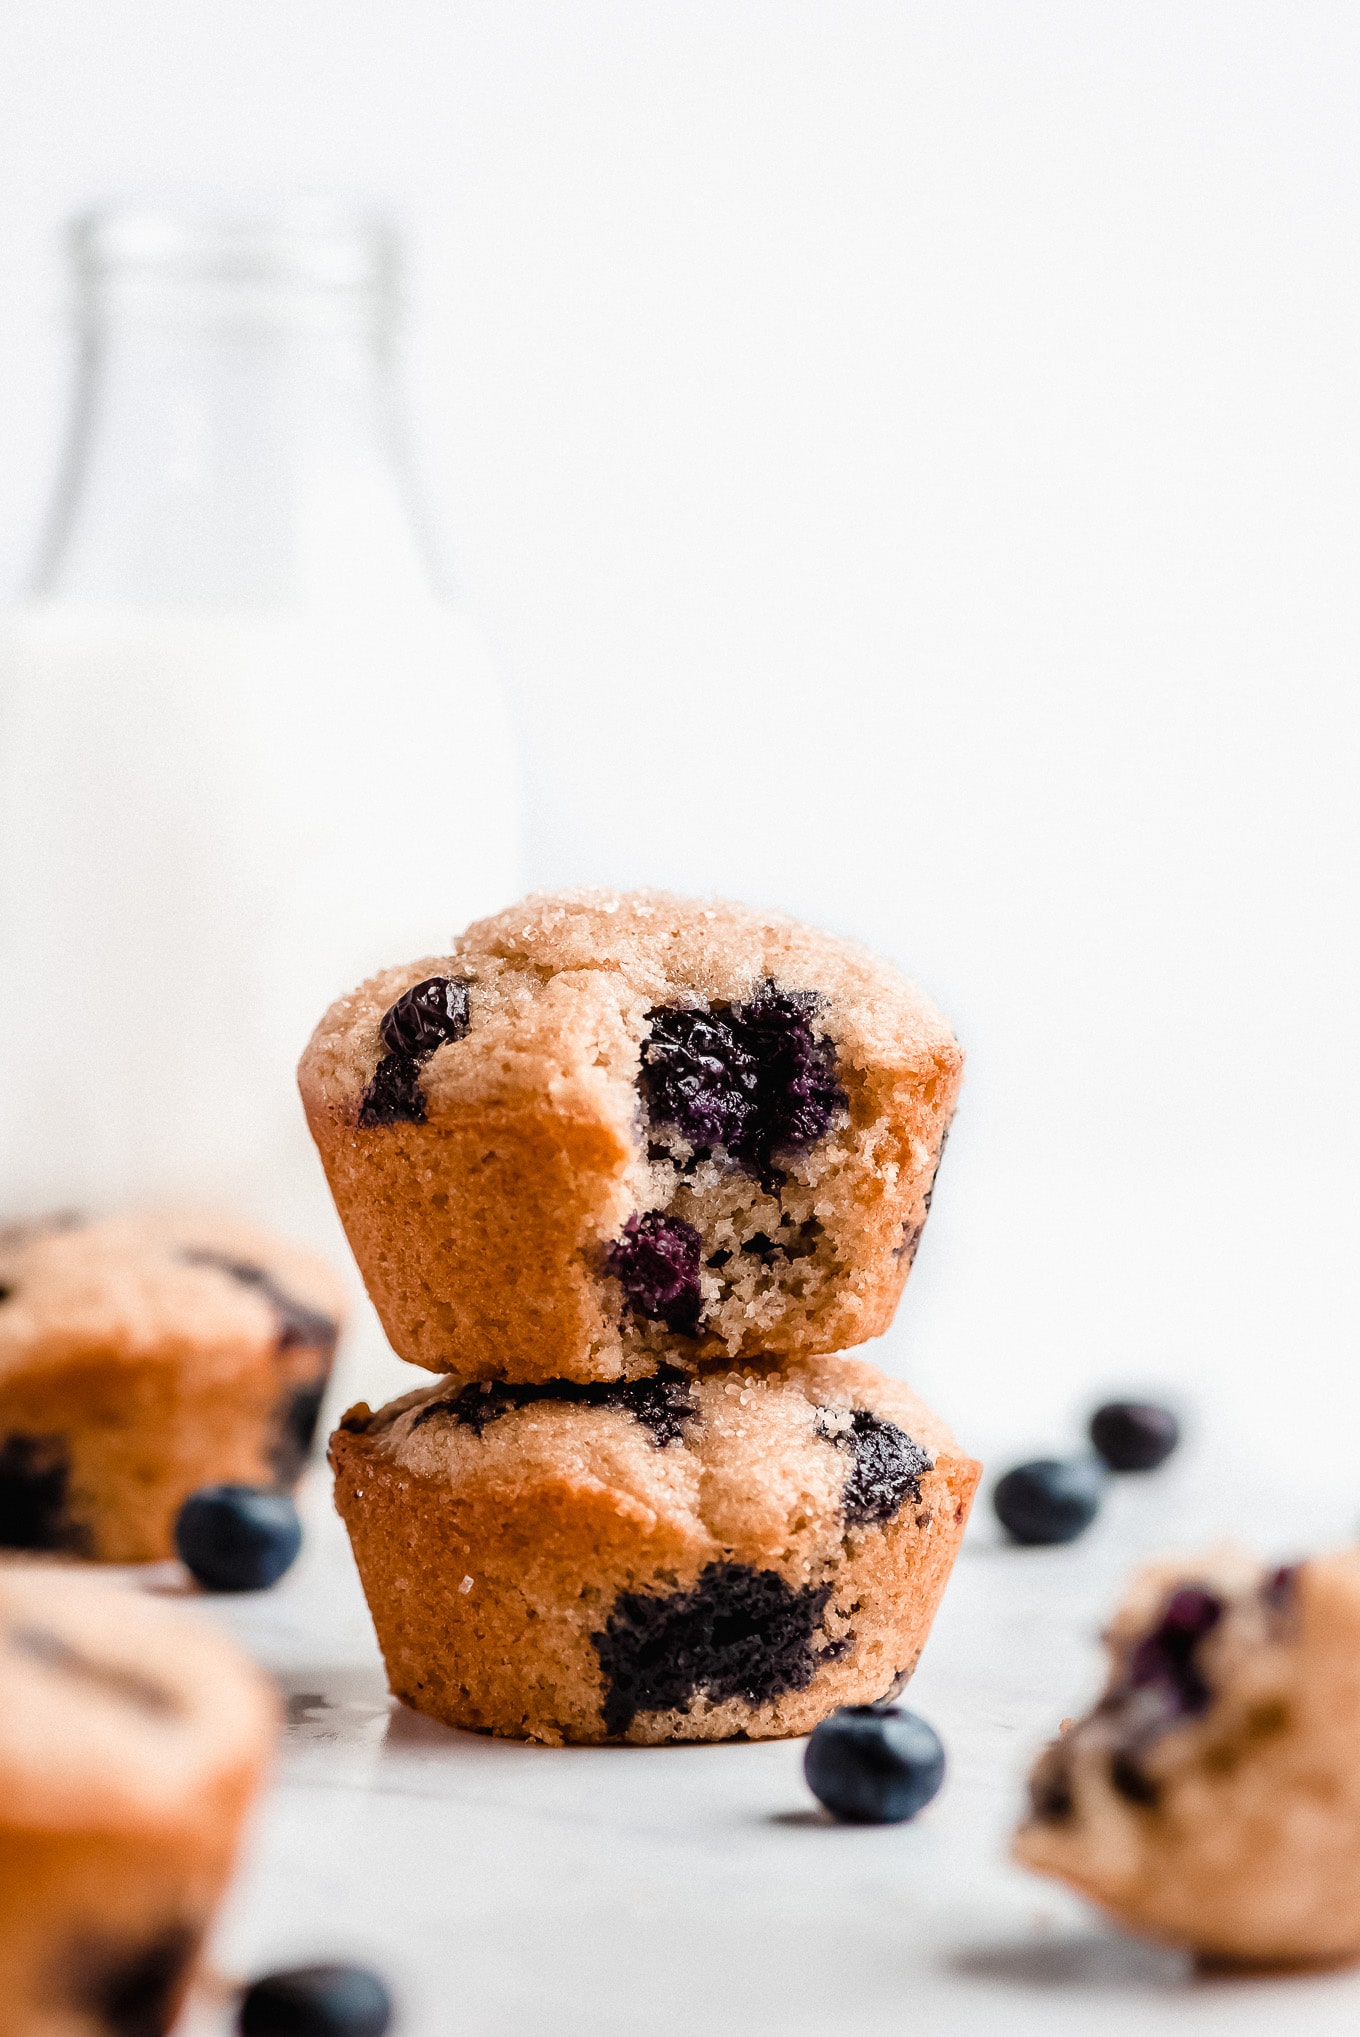 Greek Yogurt Blueberry Muffins stacked on top of each other. One has a bite taken out of it showing the moist tender crumb of the muffin.